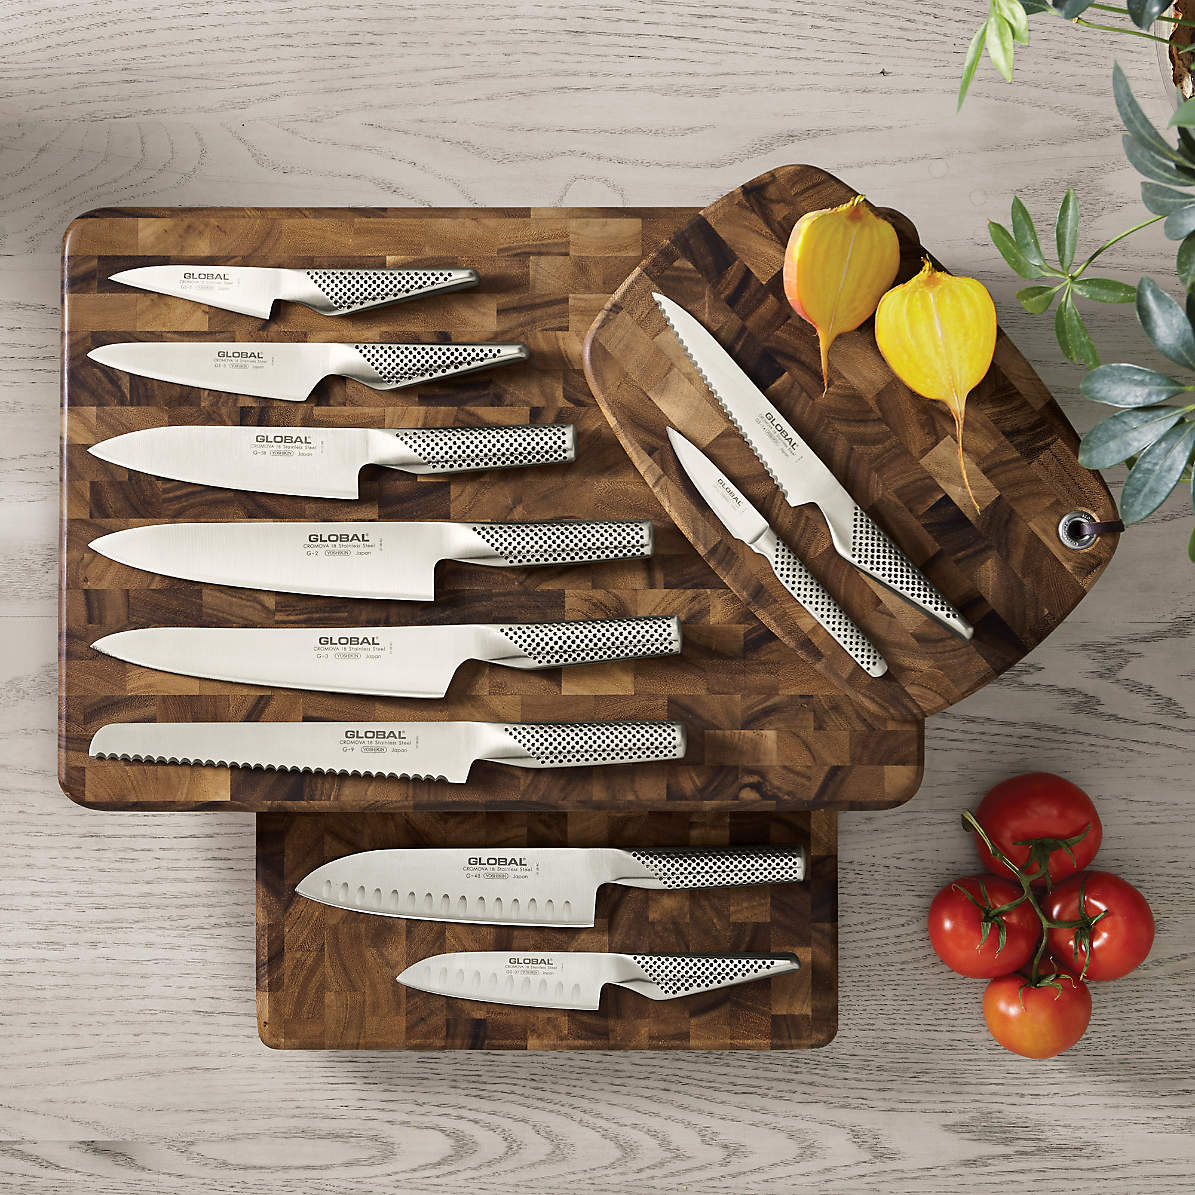 Western Chef Knives: The 6 Best in Our Global Collection